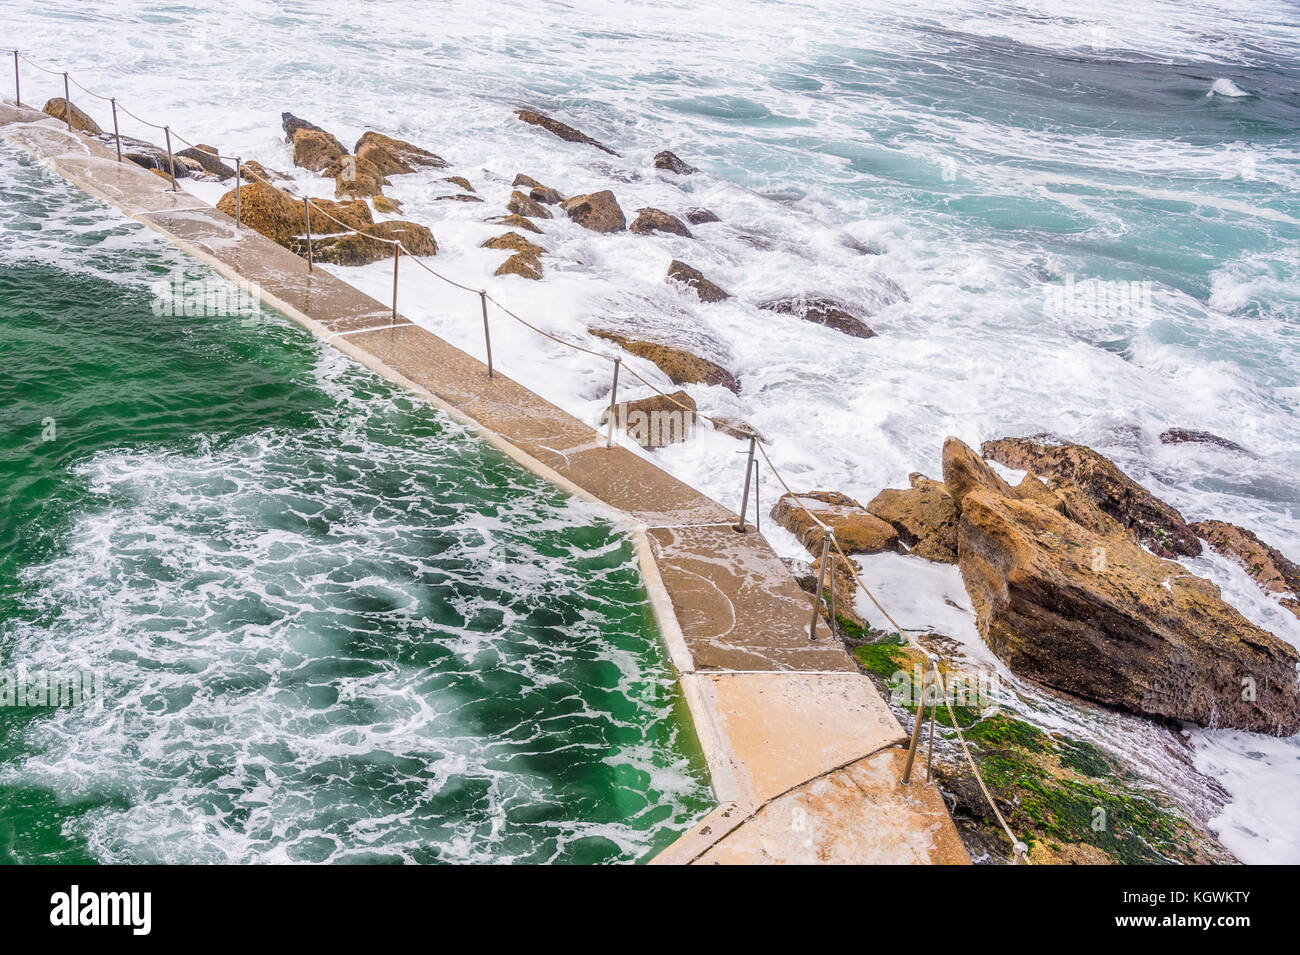 Big surf conditions at Bronte Beach rock pool in Sydney, NSW, Australia Stock Photo